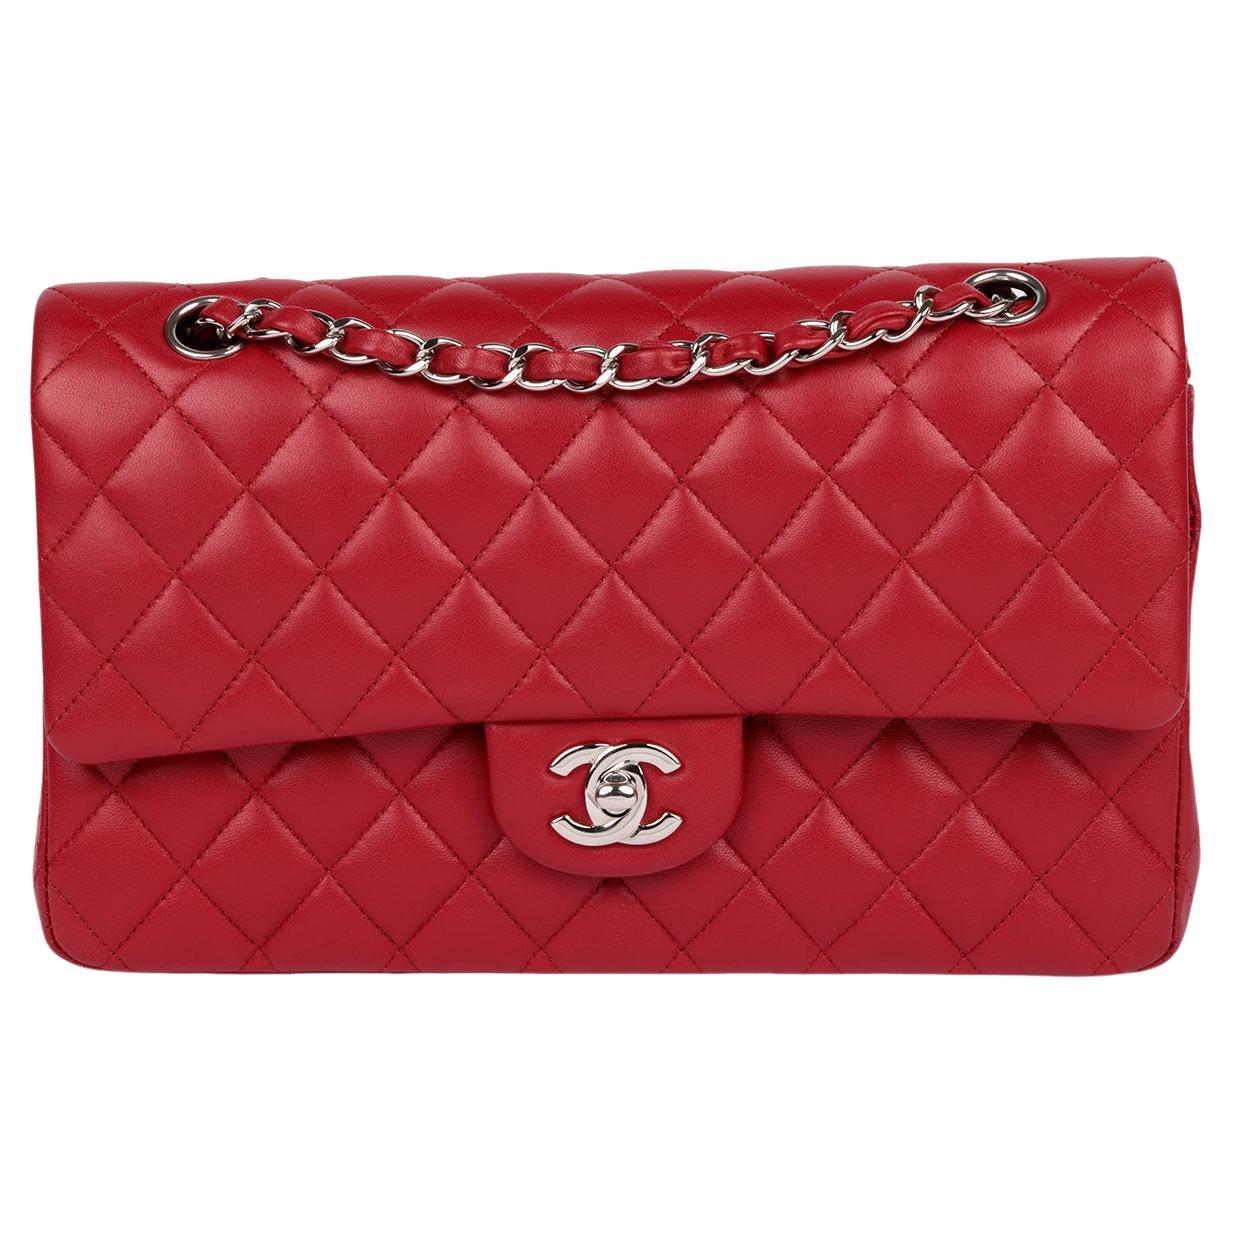 Chanel Red Quilted Lambskin Medium Classic Double Flap Bag For Sale